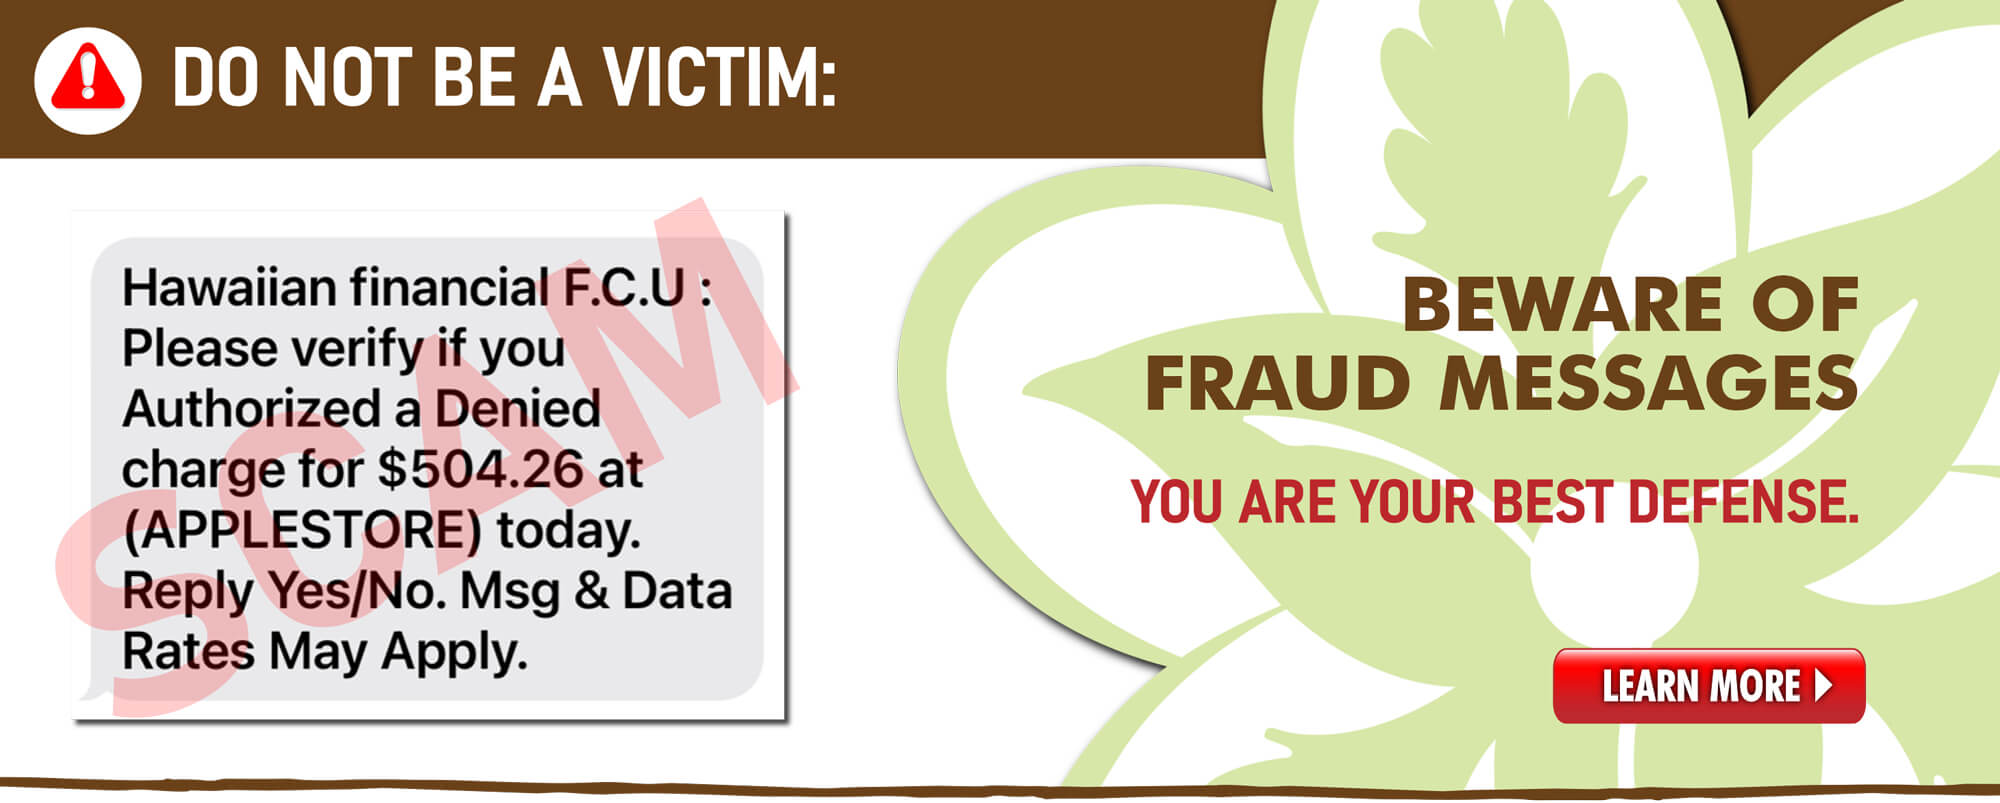 Increased volume of scamming text and calls - do not be a victim!  Click to learn more.